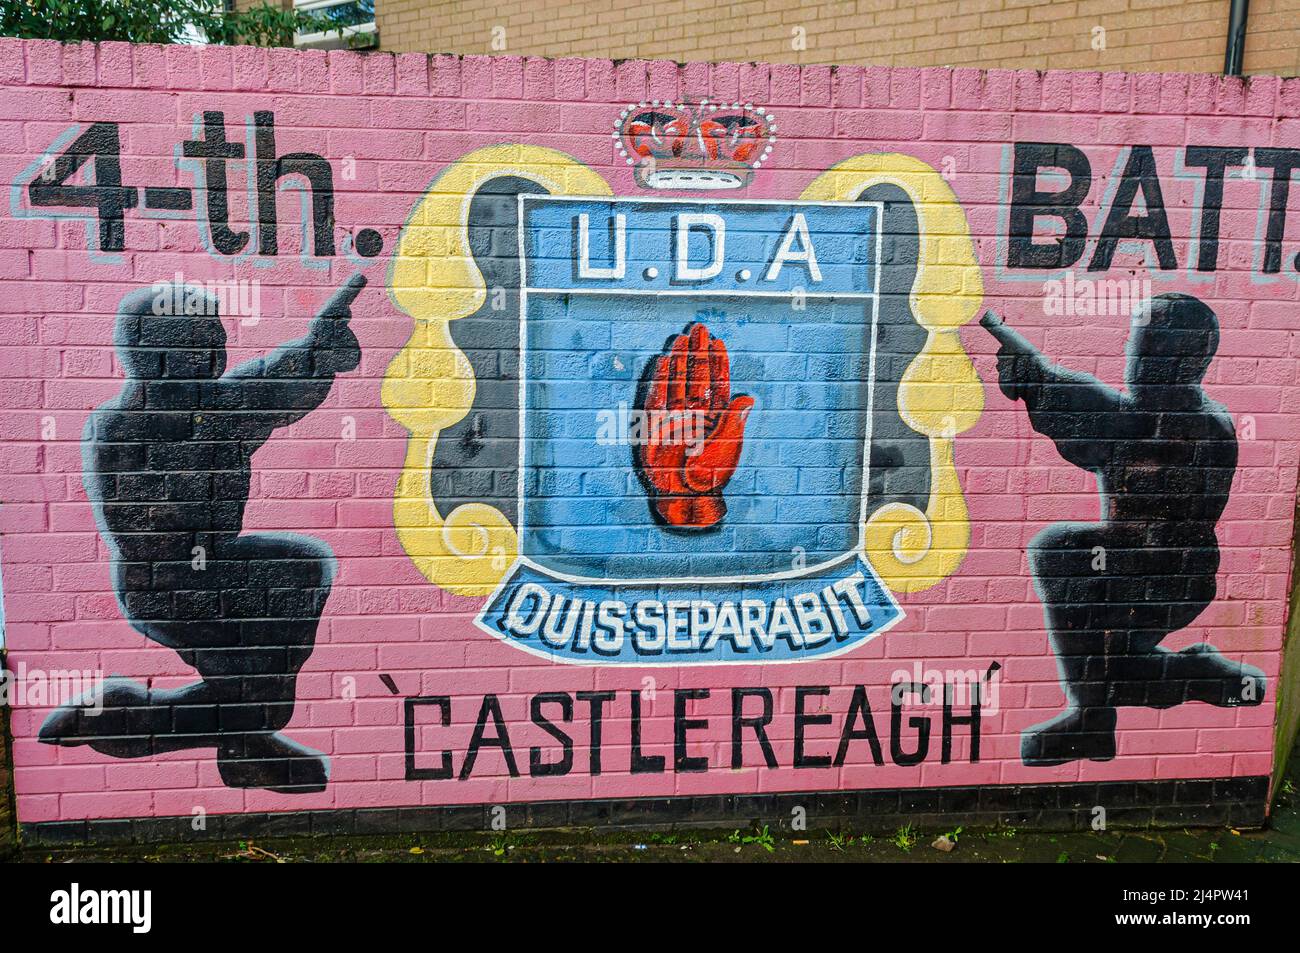 Wall mural in Belfast commemorating the 4th Batallion of the Ulster Defence Association (UDA) in Castlereagh Stock Photo